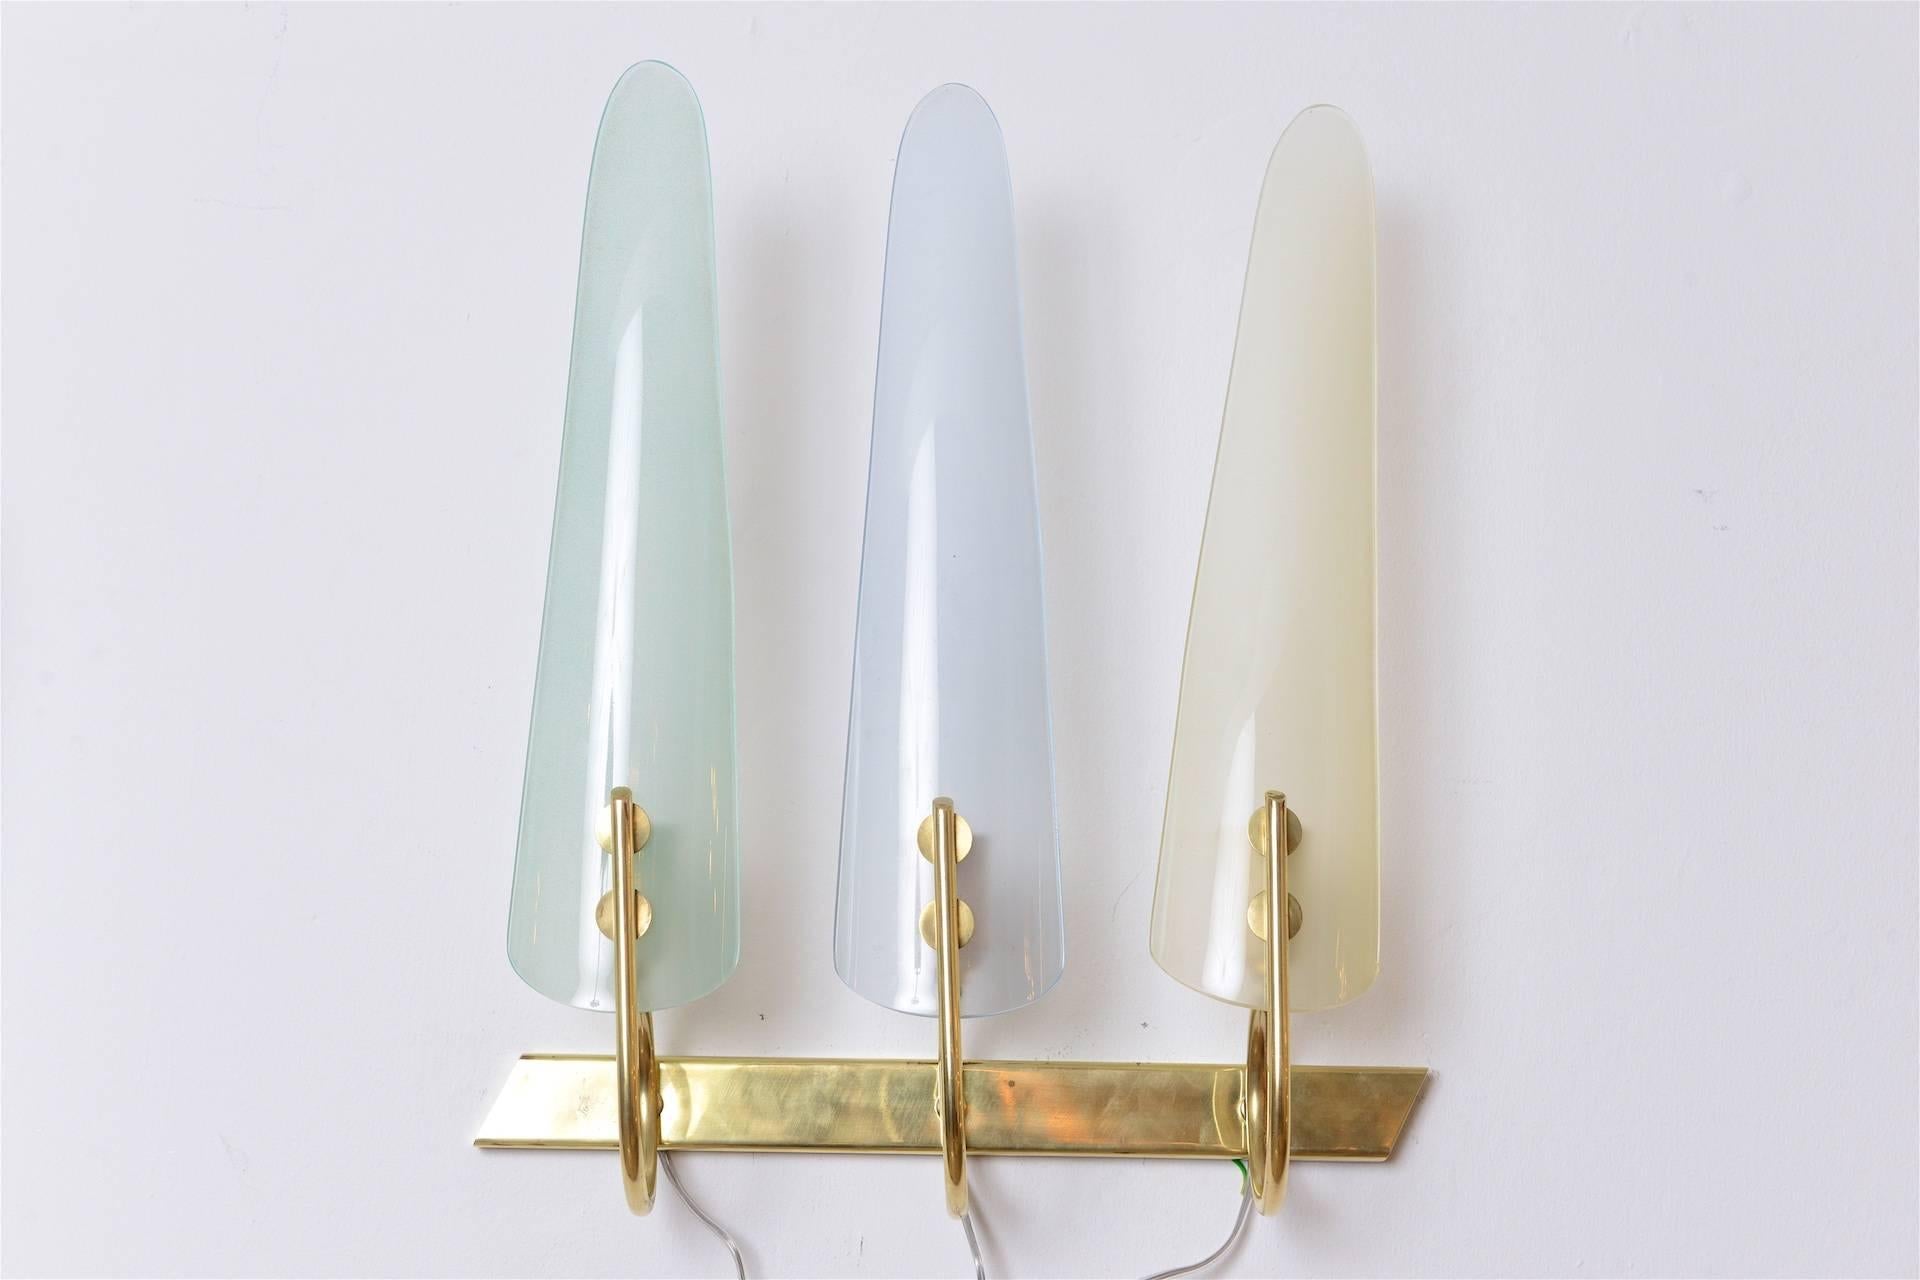 Similar in style to Dahlia wall lights by Max Ingrand for Fontana Arte

Pair of Italian wall lights. There are two other pairs of these lights with different colour combinations. Can be used as a set of six lights

Pastel shades of green, blue